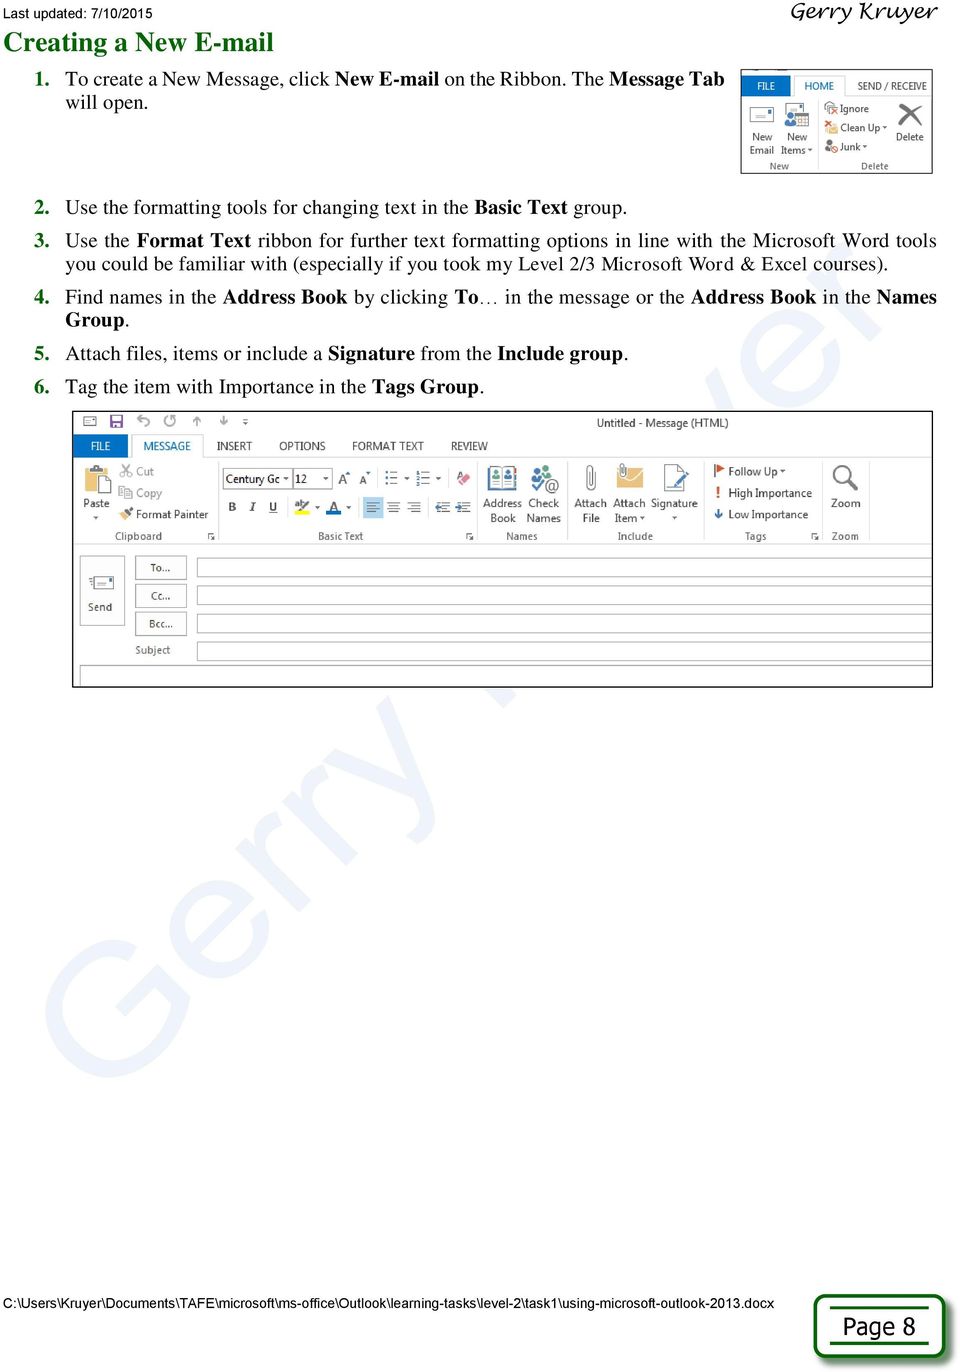 Use the Format Text ribbon for further text formatting options in line with the Microsoft Word tools you could be familiar with (especially if you took